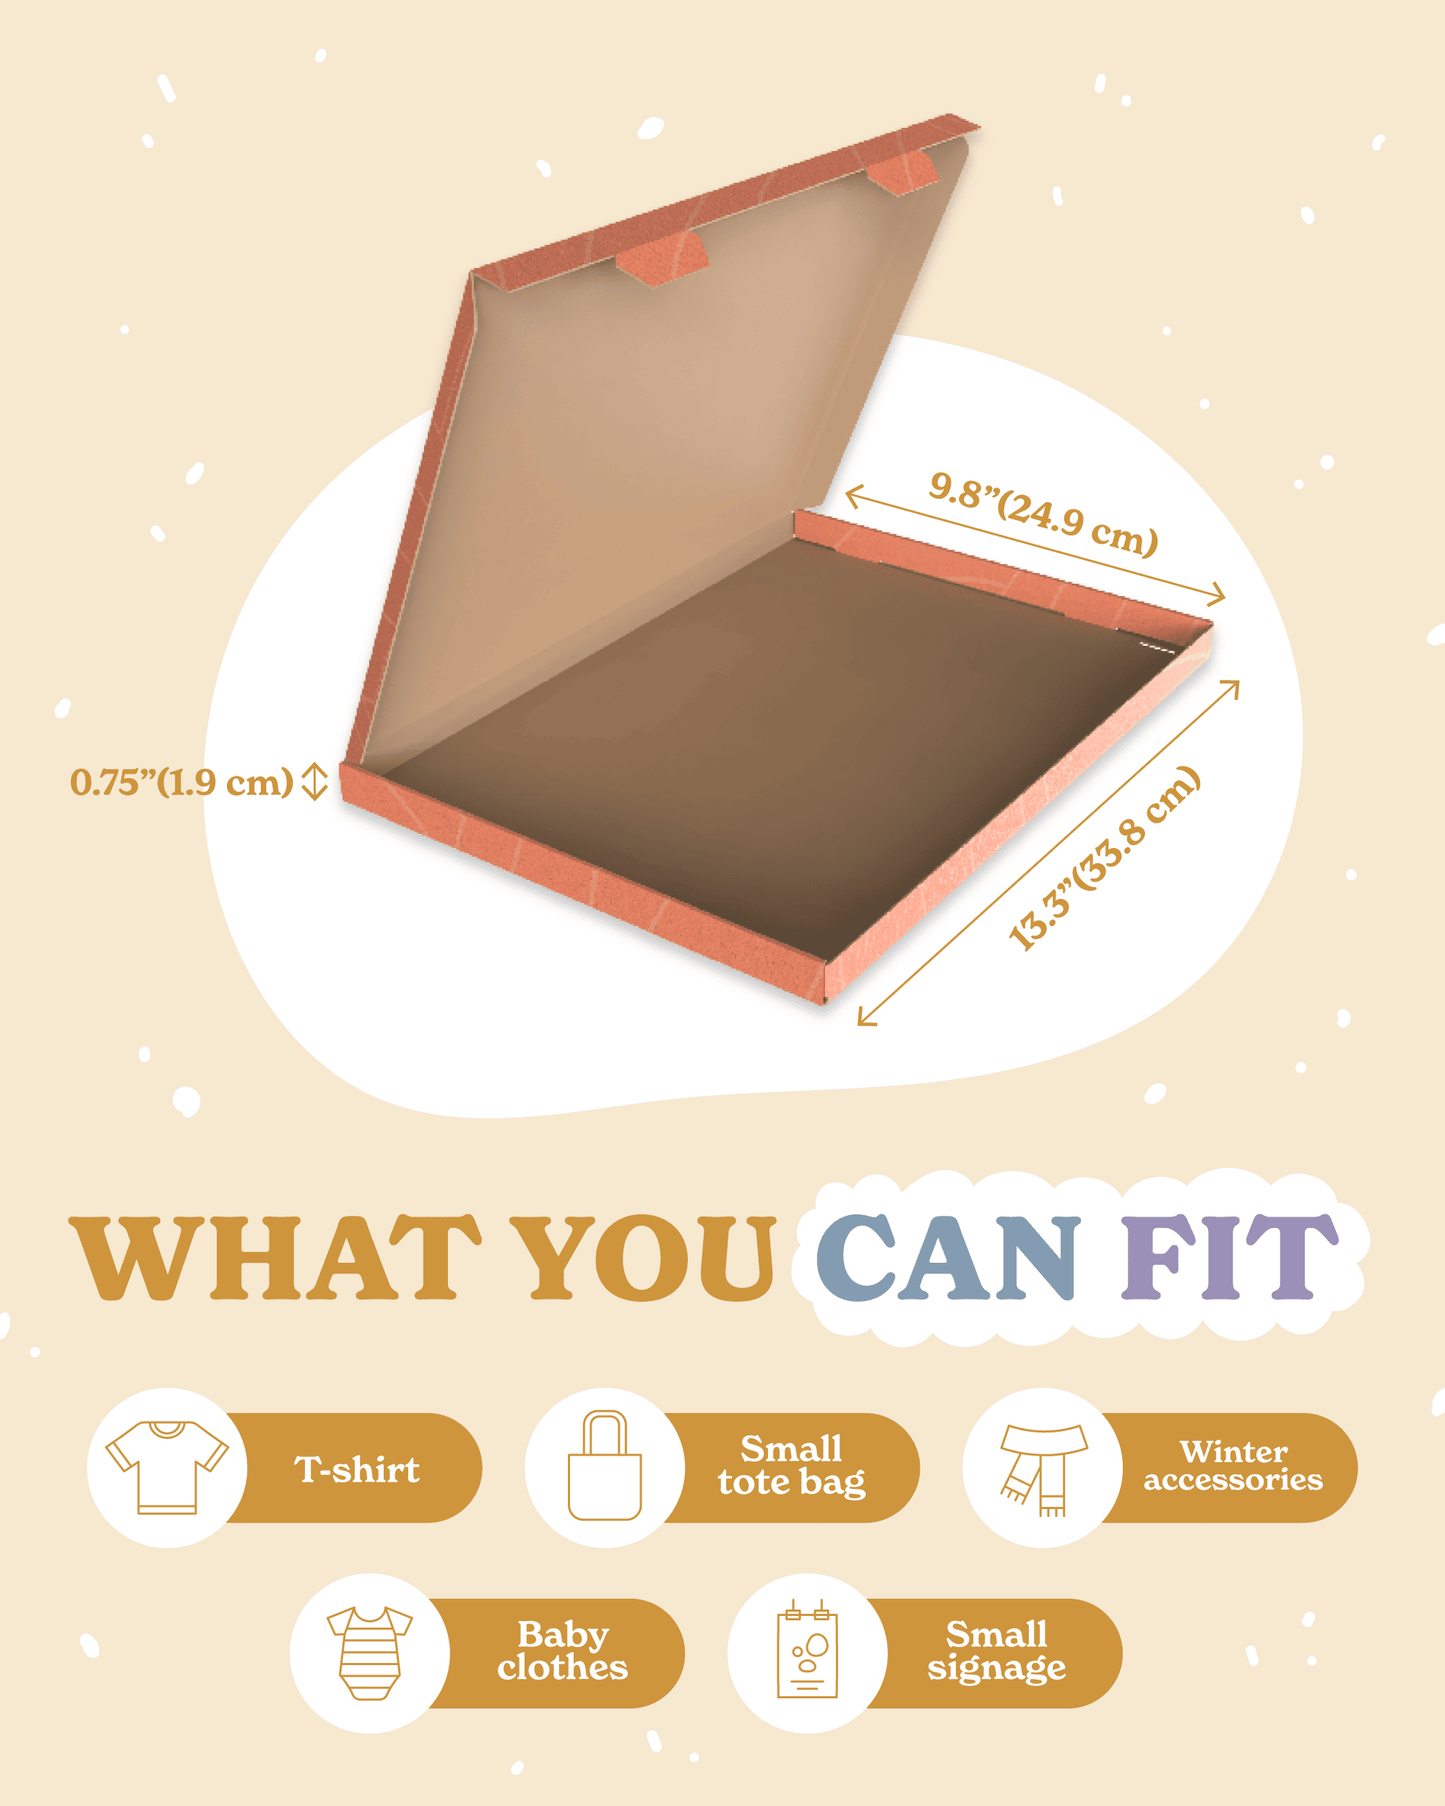 What you can fit with the SlimBox Cedar Leaf 9.8" x 13.3" - Extra Large from impack.co.